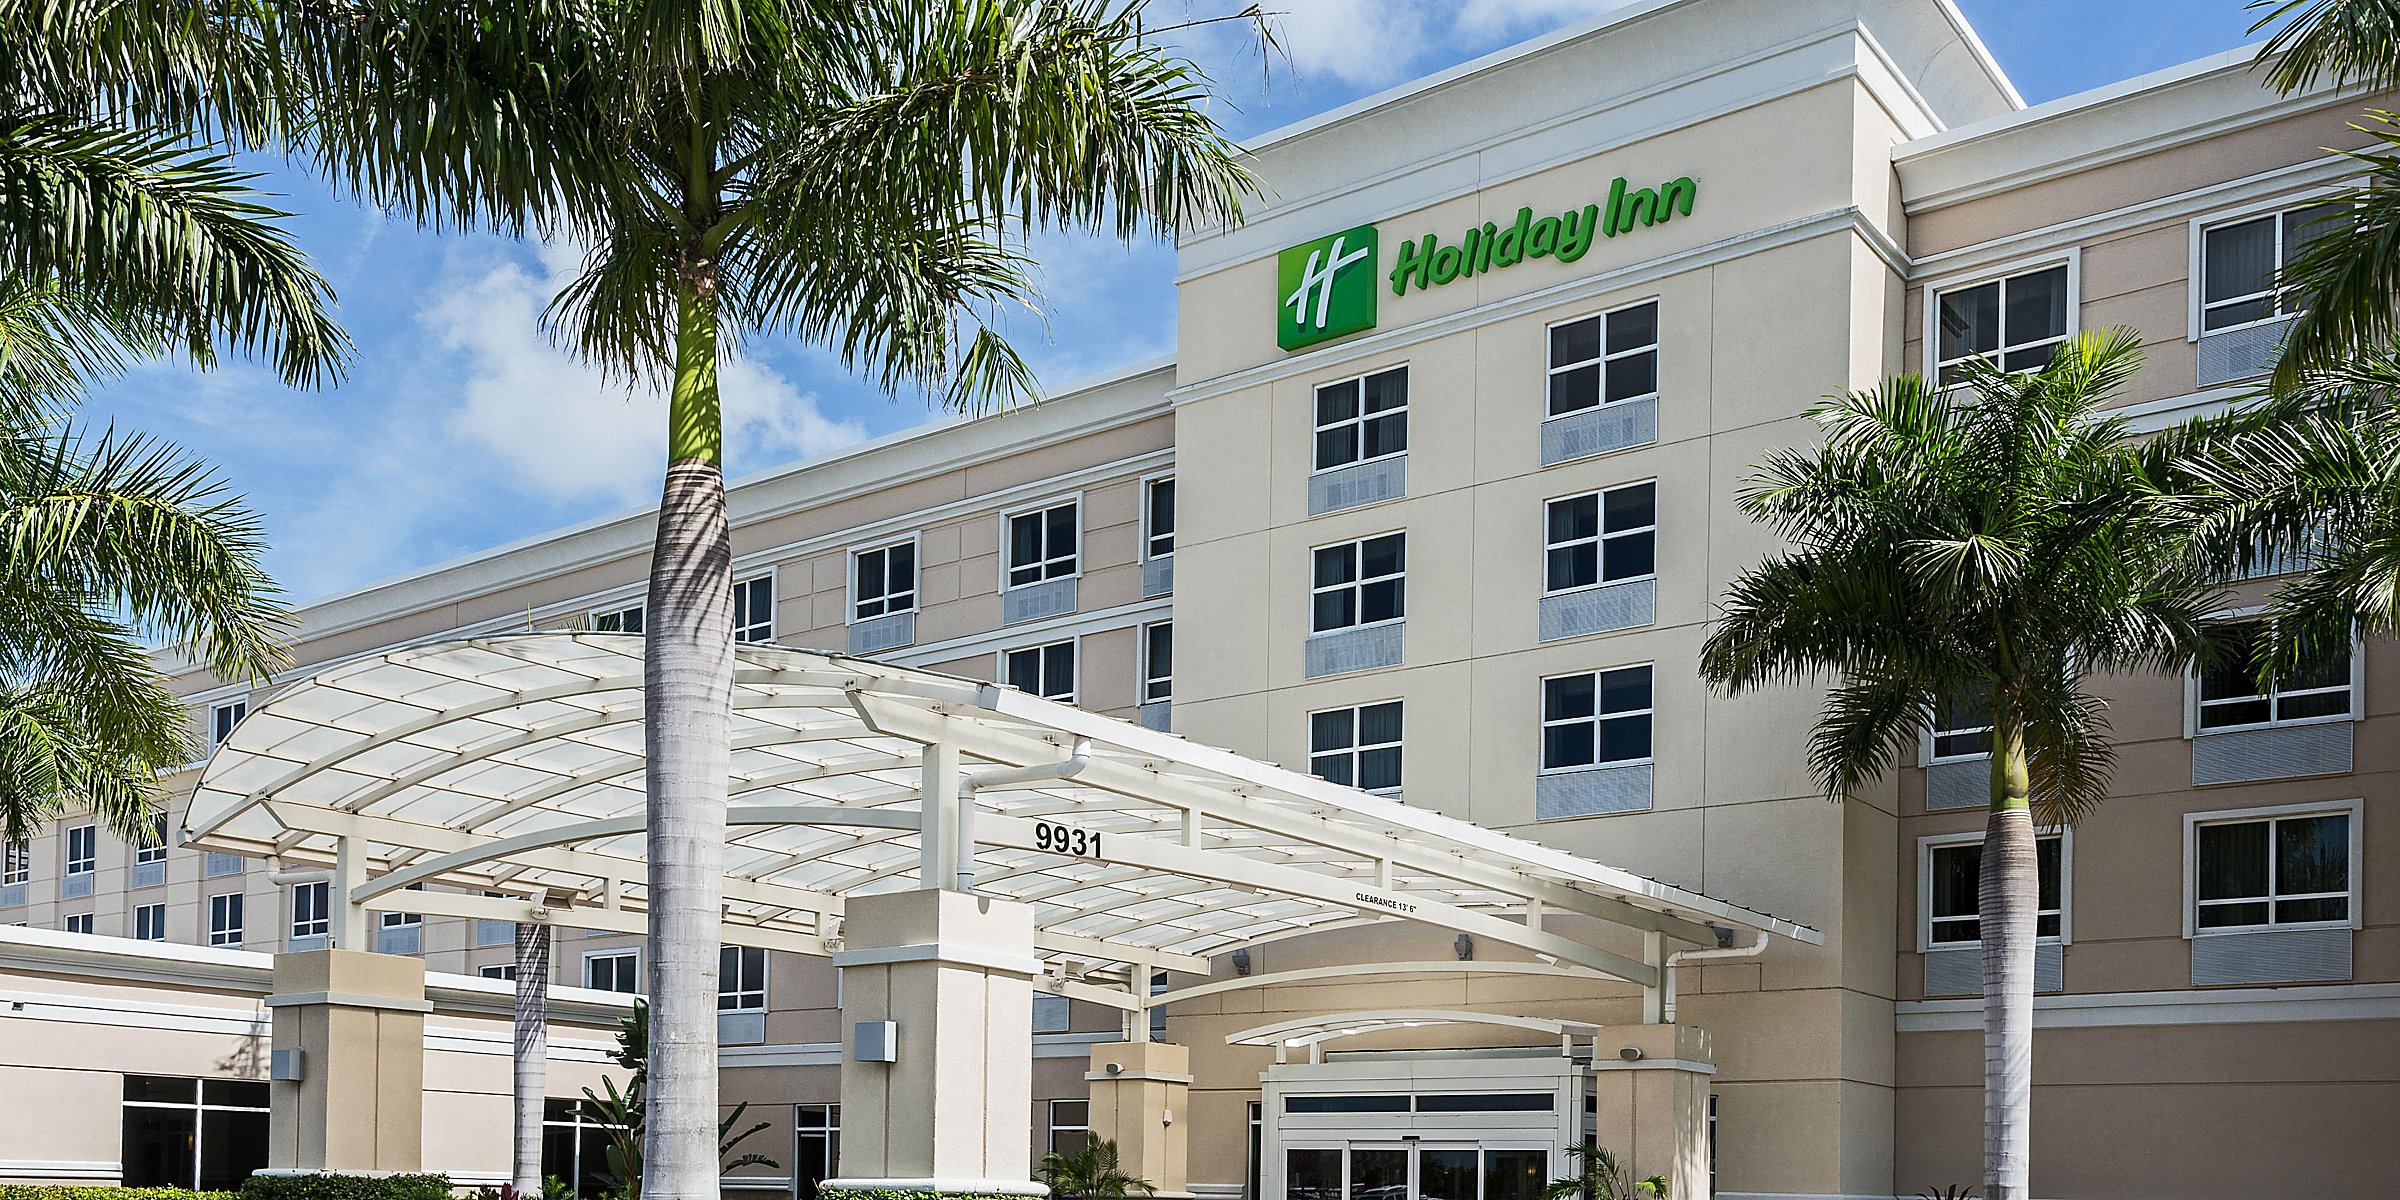 Holiday Inn Fort Myers 3707635031 2x1?wid=2400&hei=1200&qlt=85,0&resMode=sharp2&op Usm=1.75,0.9,2,0&qlt=85,0&resMode=sharp2&op Usm=1.75,0.9,2,0